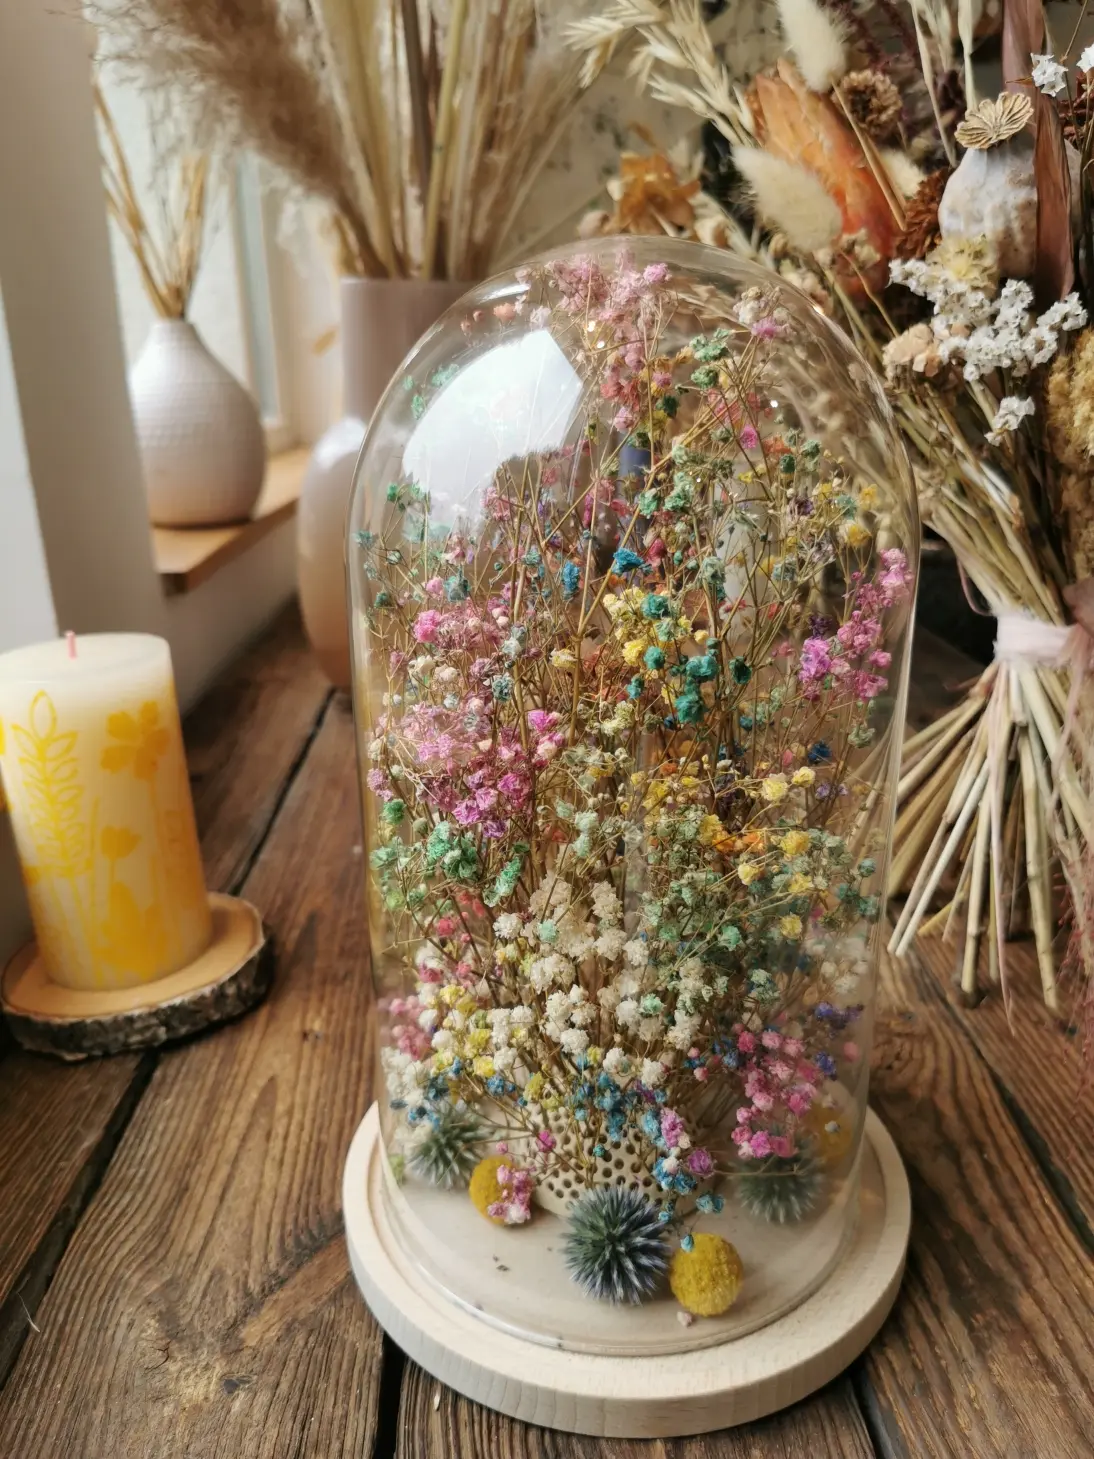 The dried gypsophila in the form of a lampshade will be enjoyed for years to come.